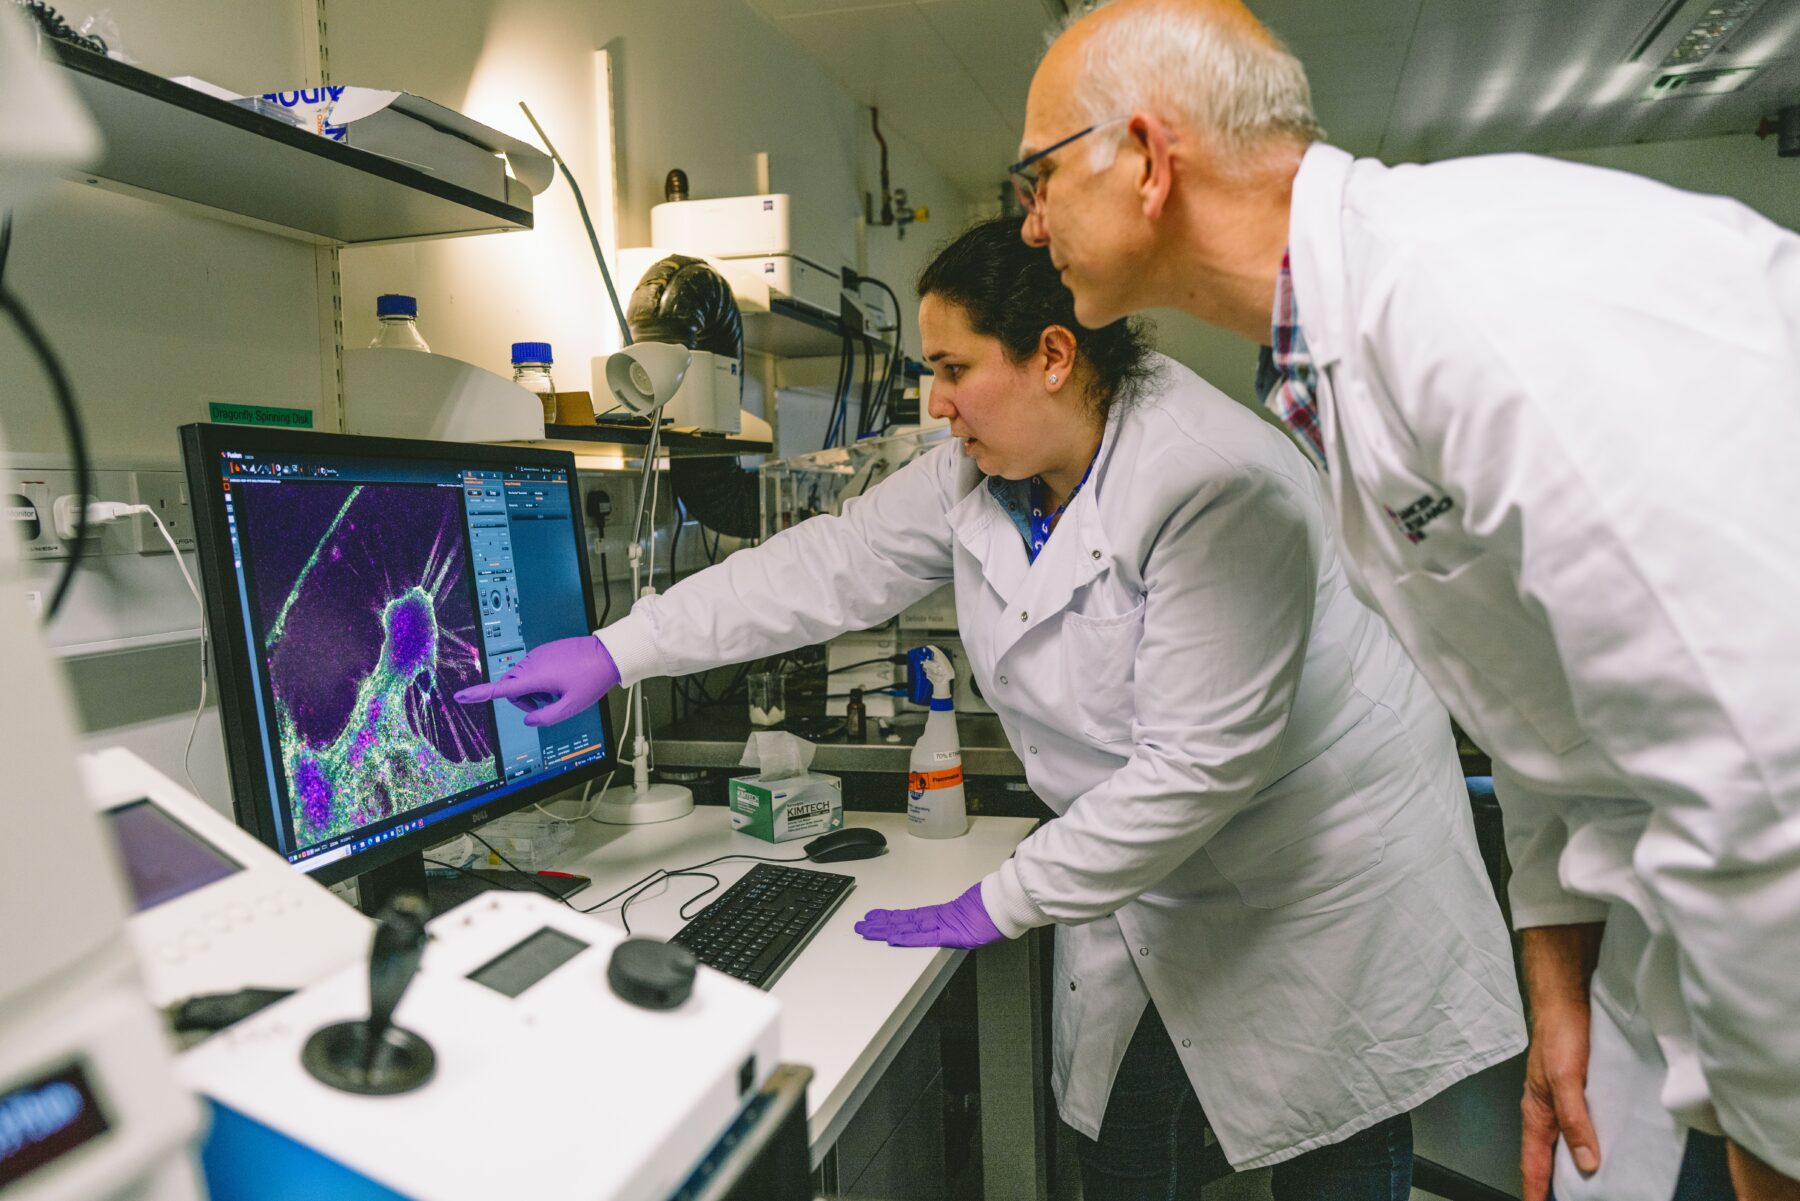 Two cancer researchers looking at a cell image on screen